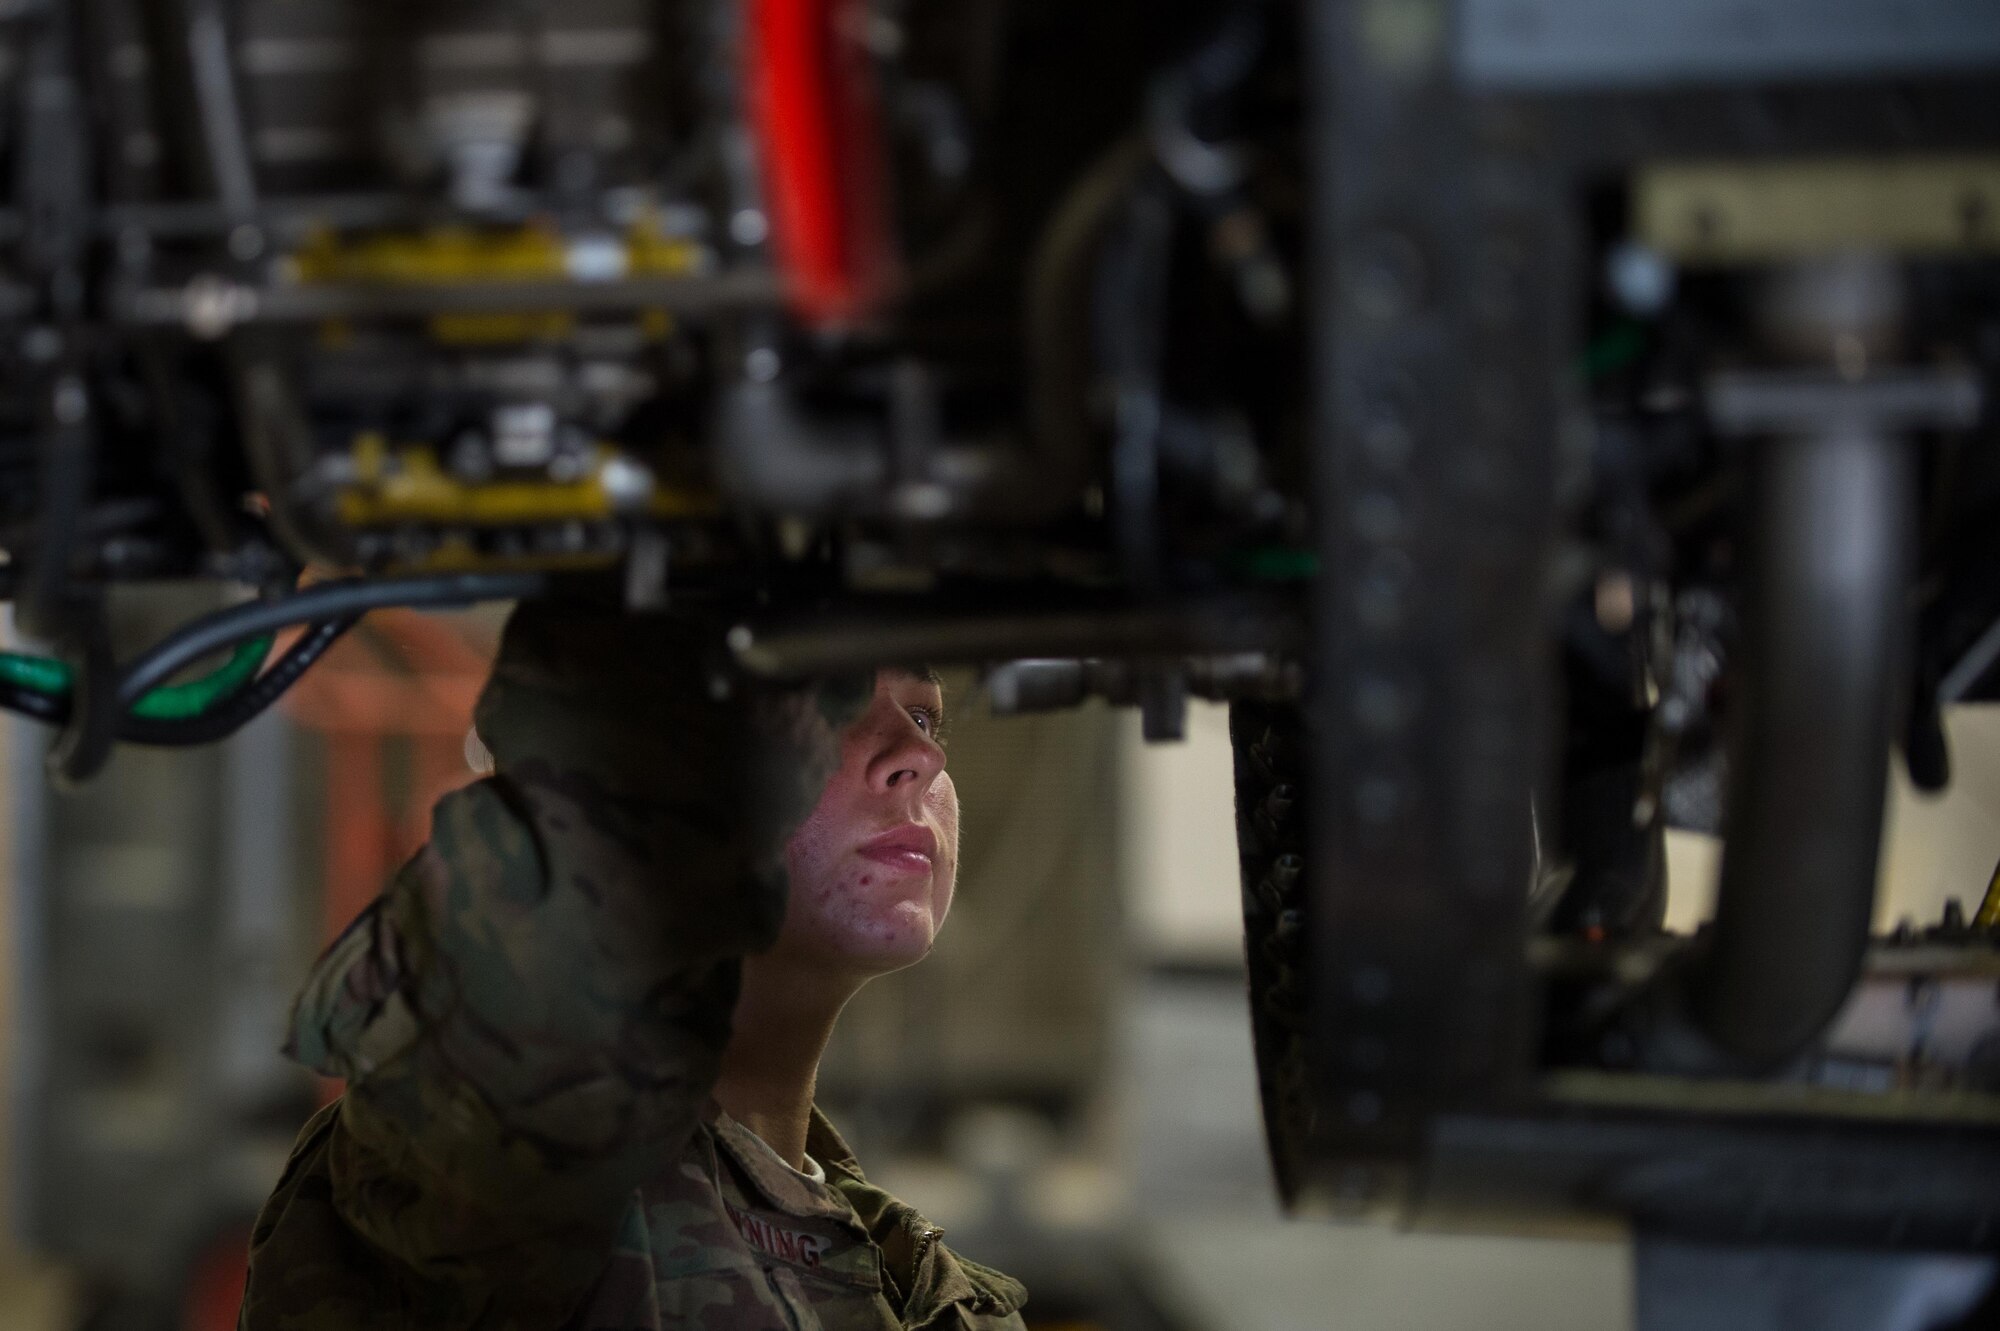 U.S. Air Force Senior Airman Jaid Downing, 455th Expeditionary Maintenance Squadron, performs a 400-hour engine inspection on an F-16 Fighting Falcon aircraft at Bagram Airfield, Afghanistan, June 9, 2015. The 455th EAMXS ensure Fighting Falcons on Bagram are prepared for flight and return them to a mission-ready state once they land.  (U.S. Air Force photo by Tech. Sgt. Joseph Swafford/Released)